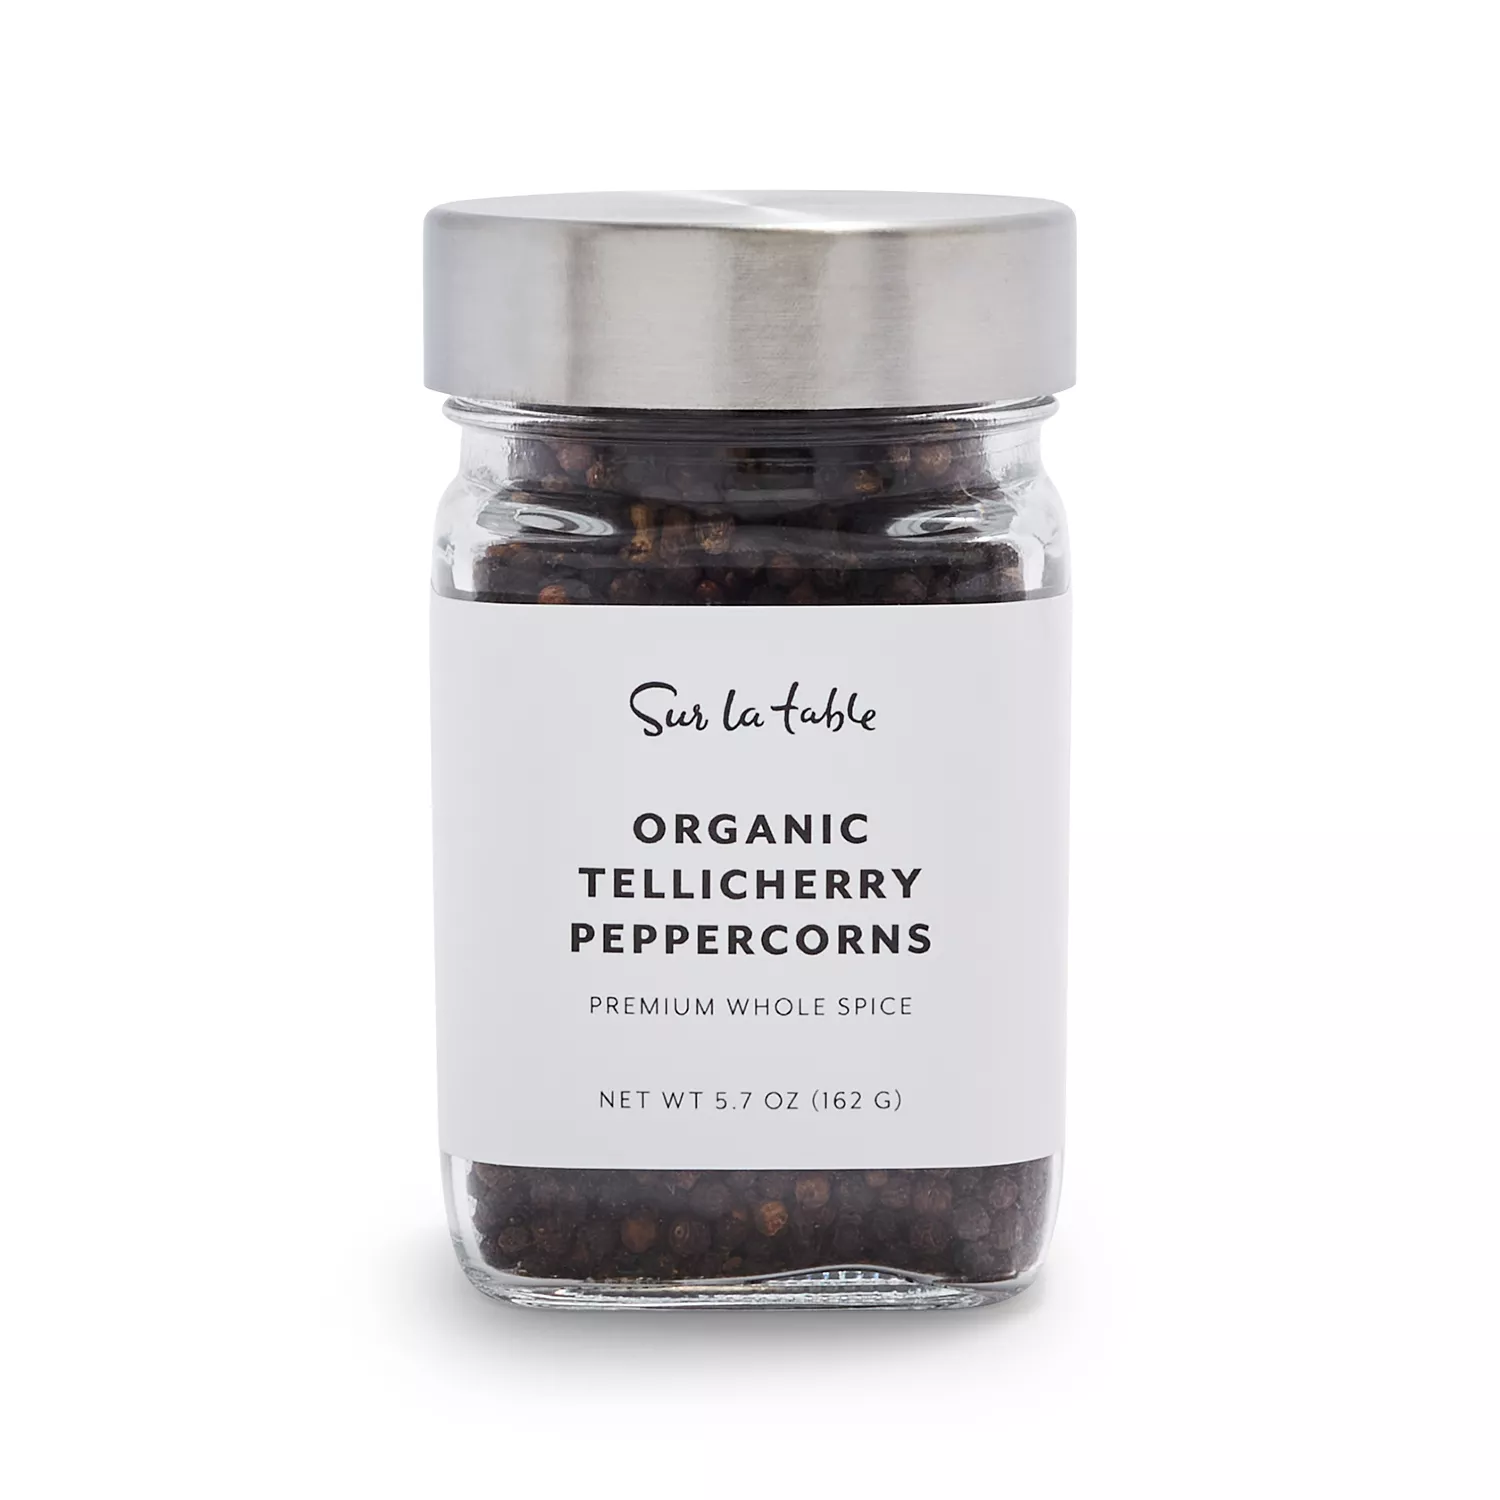 Peppercorn Spice Gift Set - Contains 5 Plastic Jars Weight of Product Varies for Each Peppercorn - Kosher